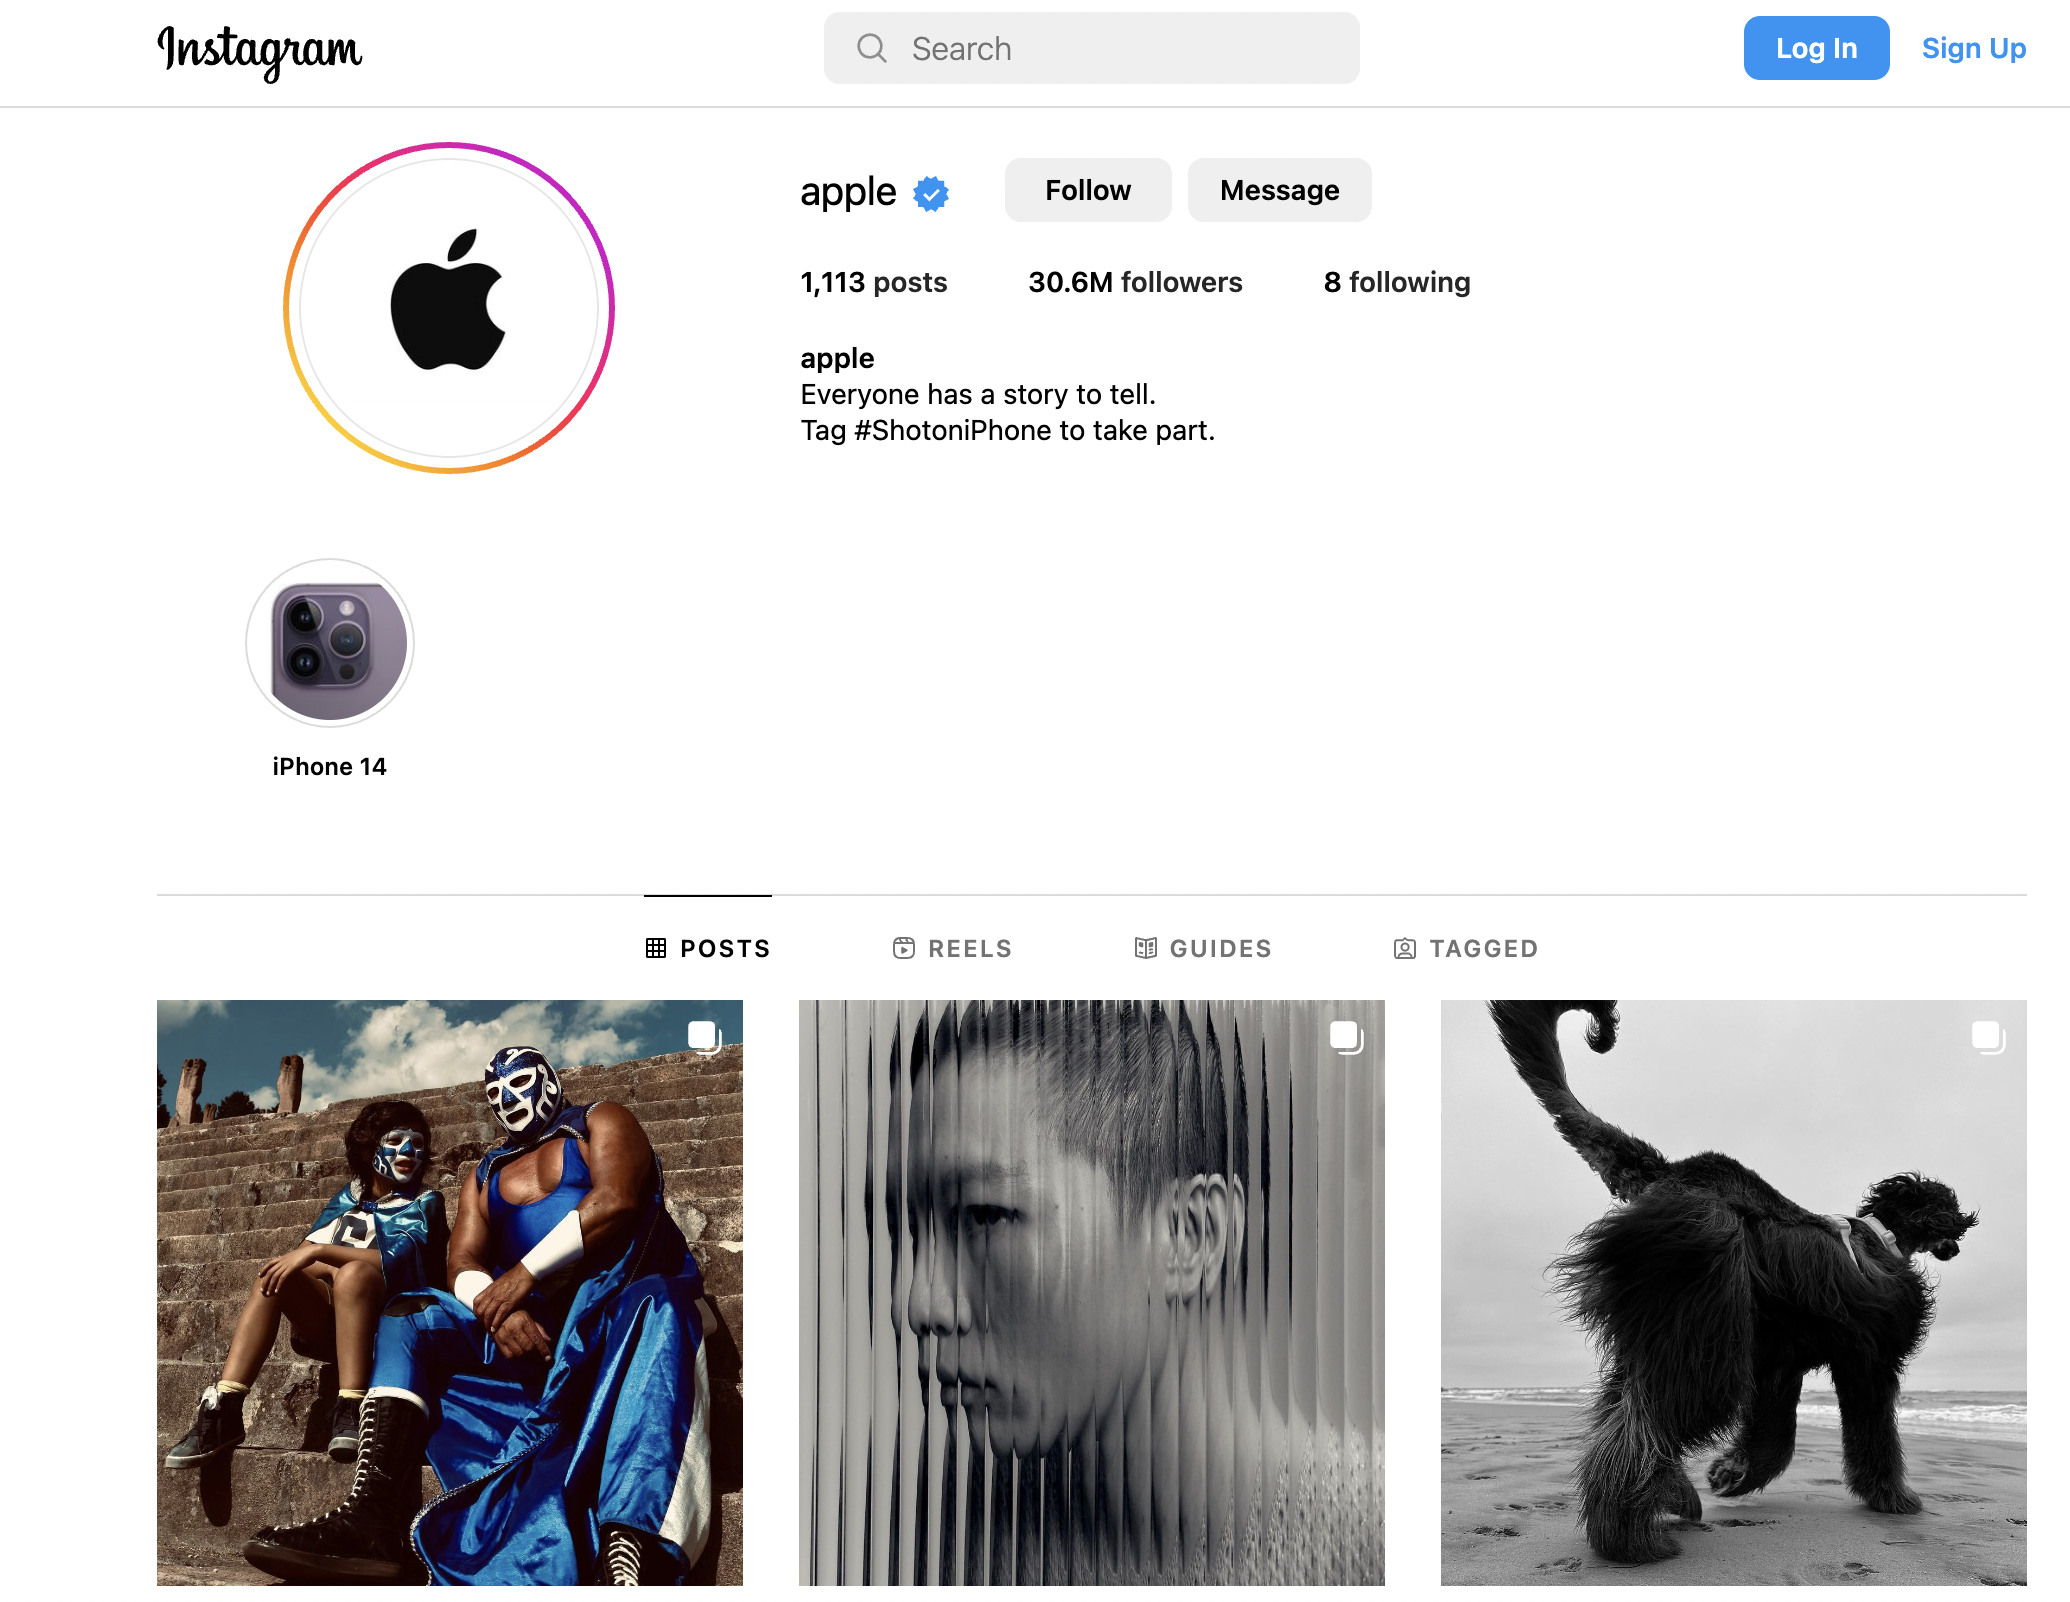 “A 3x3 grid with Apple’s otherworldly Instagram posts.”